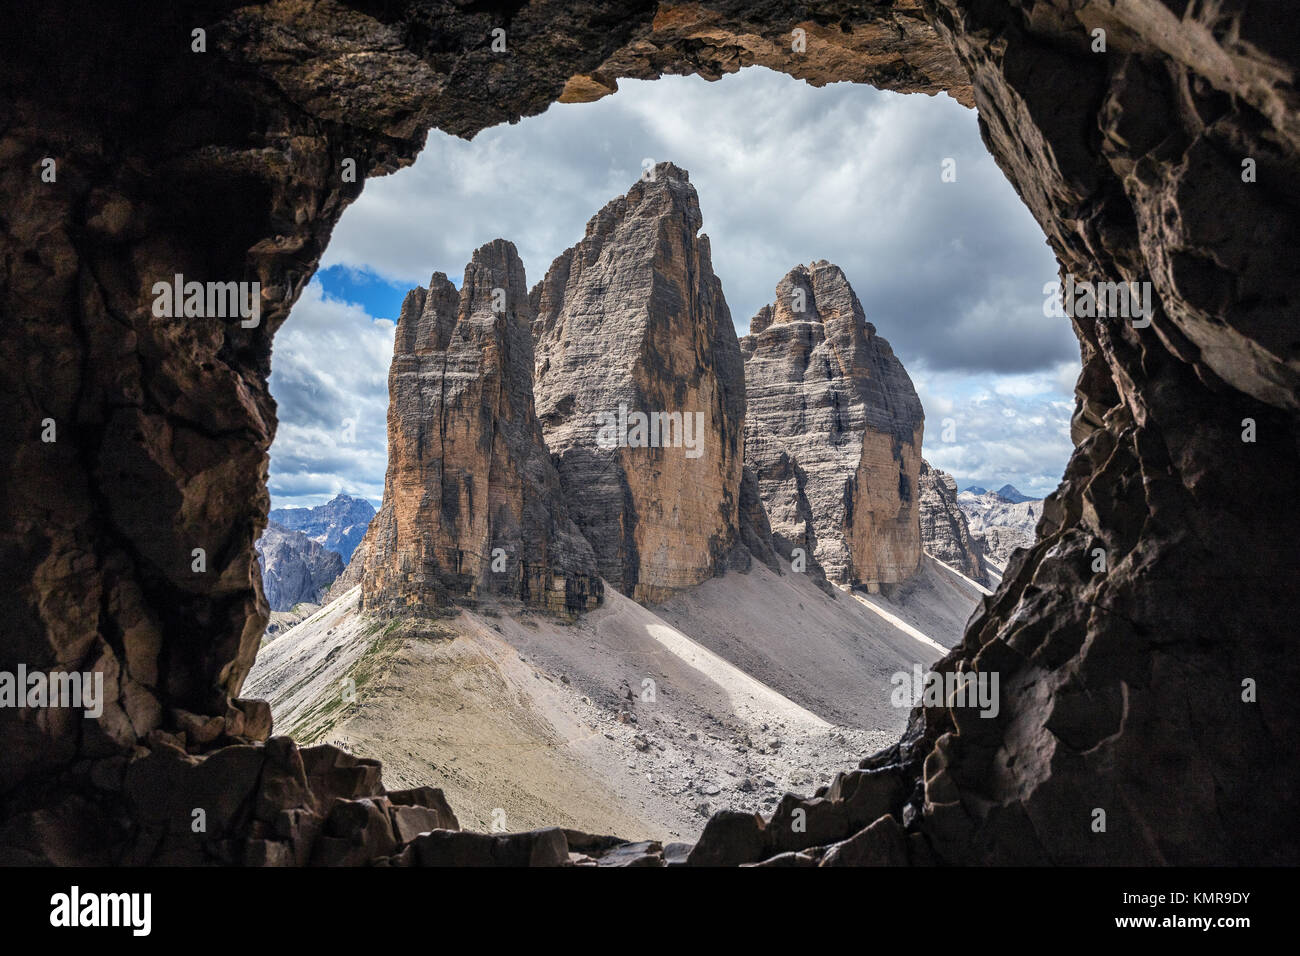 The Tre Cime di Lavaredo mountain peaks in the Three Peaks Nature Park. View from a war gallery of Monte Paterno. The Dolomites. Italian Alps. Europe. Stock Photo